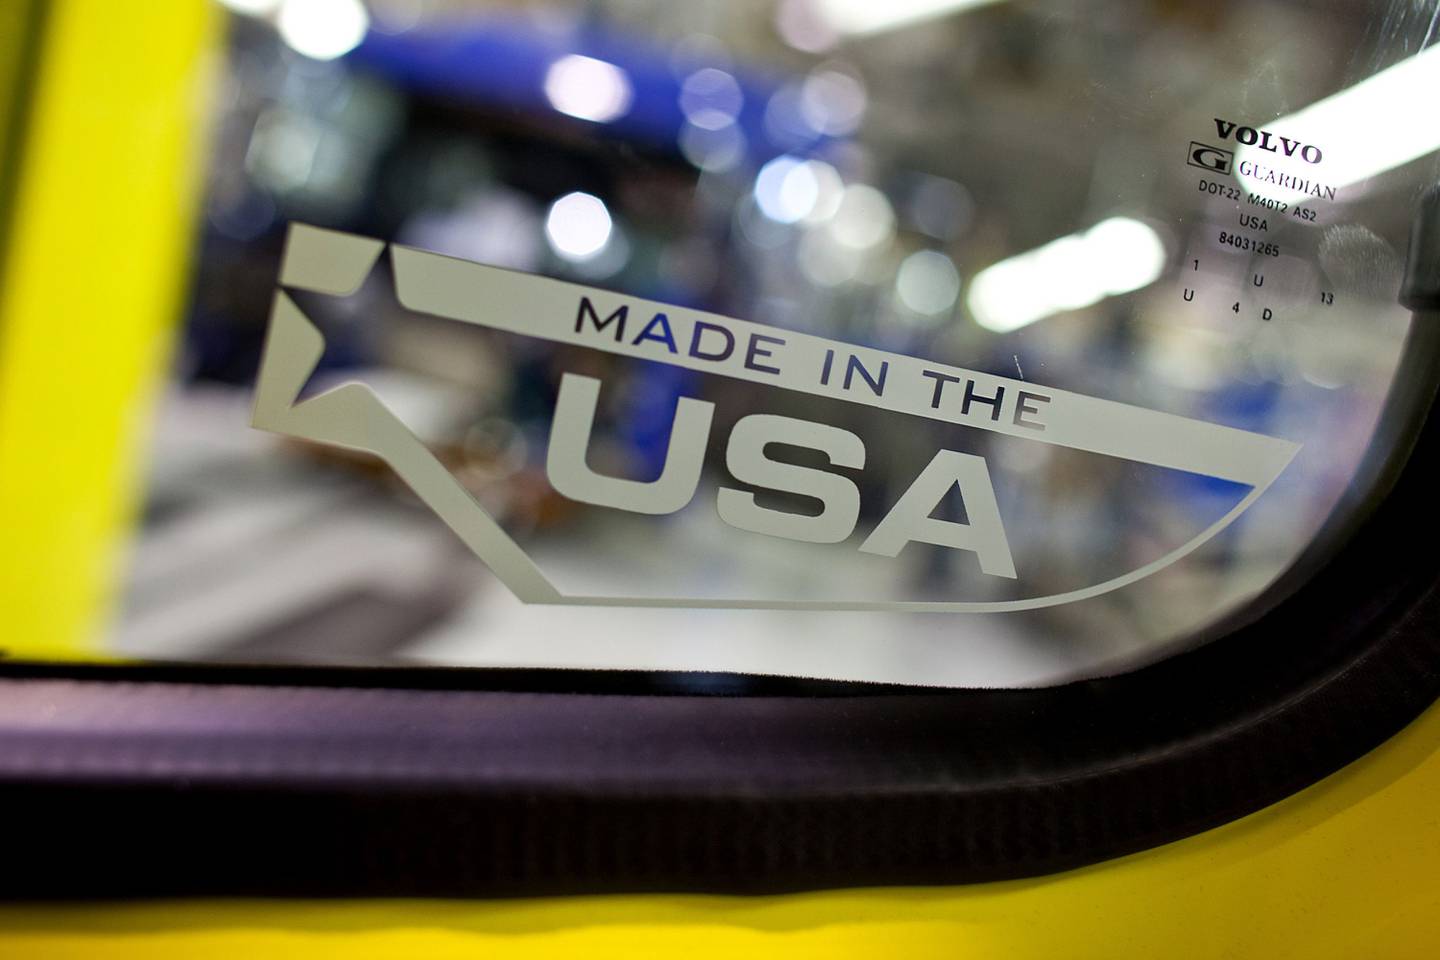 A "Made in the USA" sticker. Photographer: Justin Ide/Bloomberg